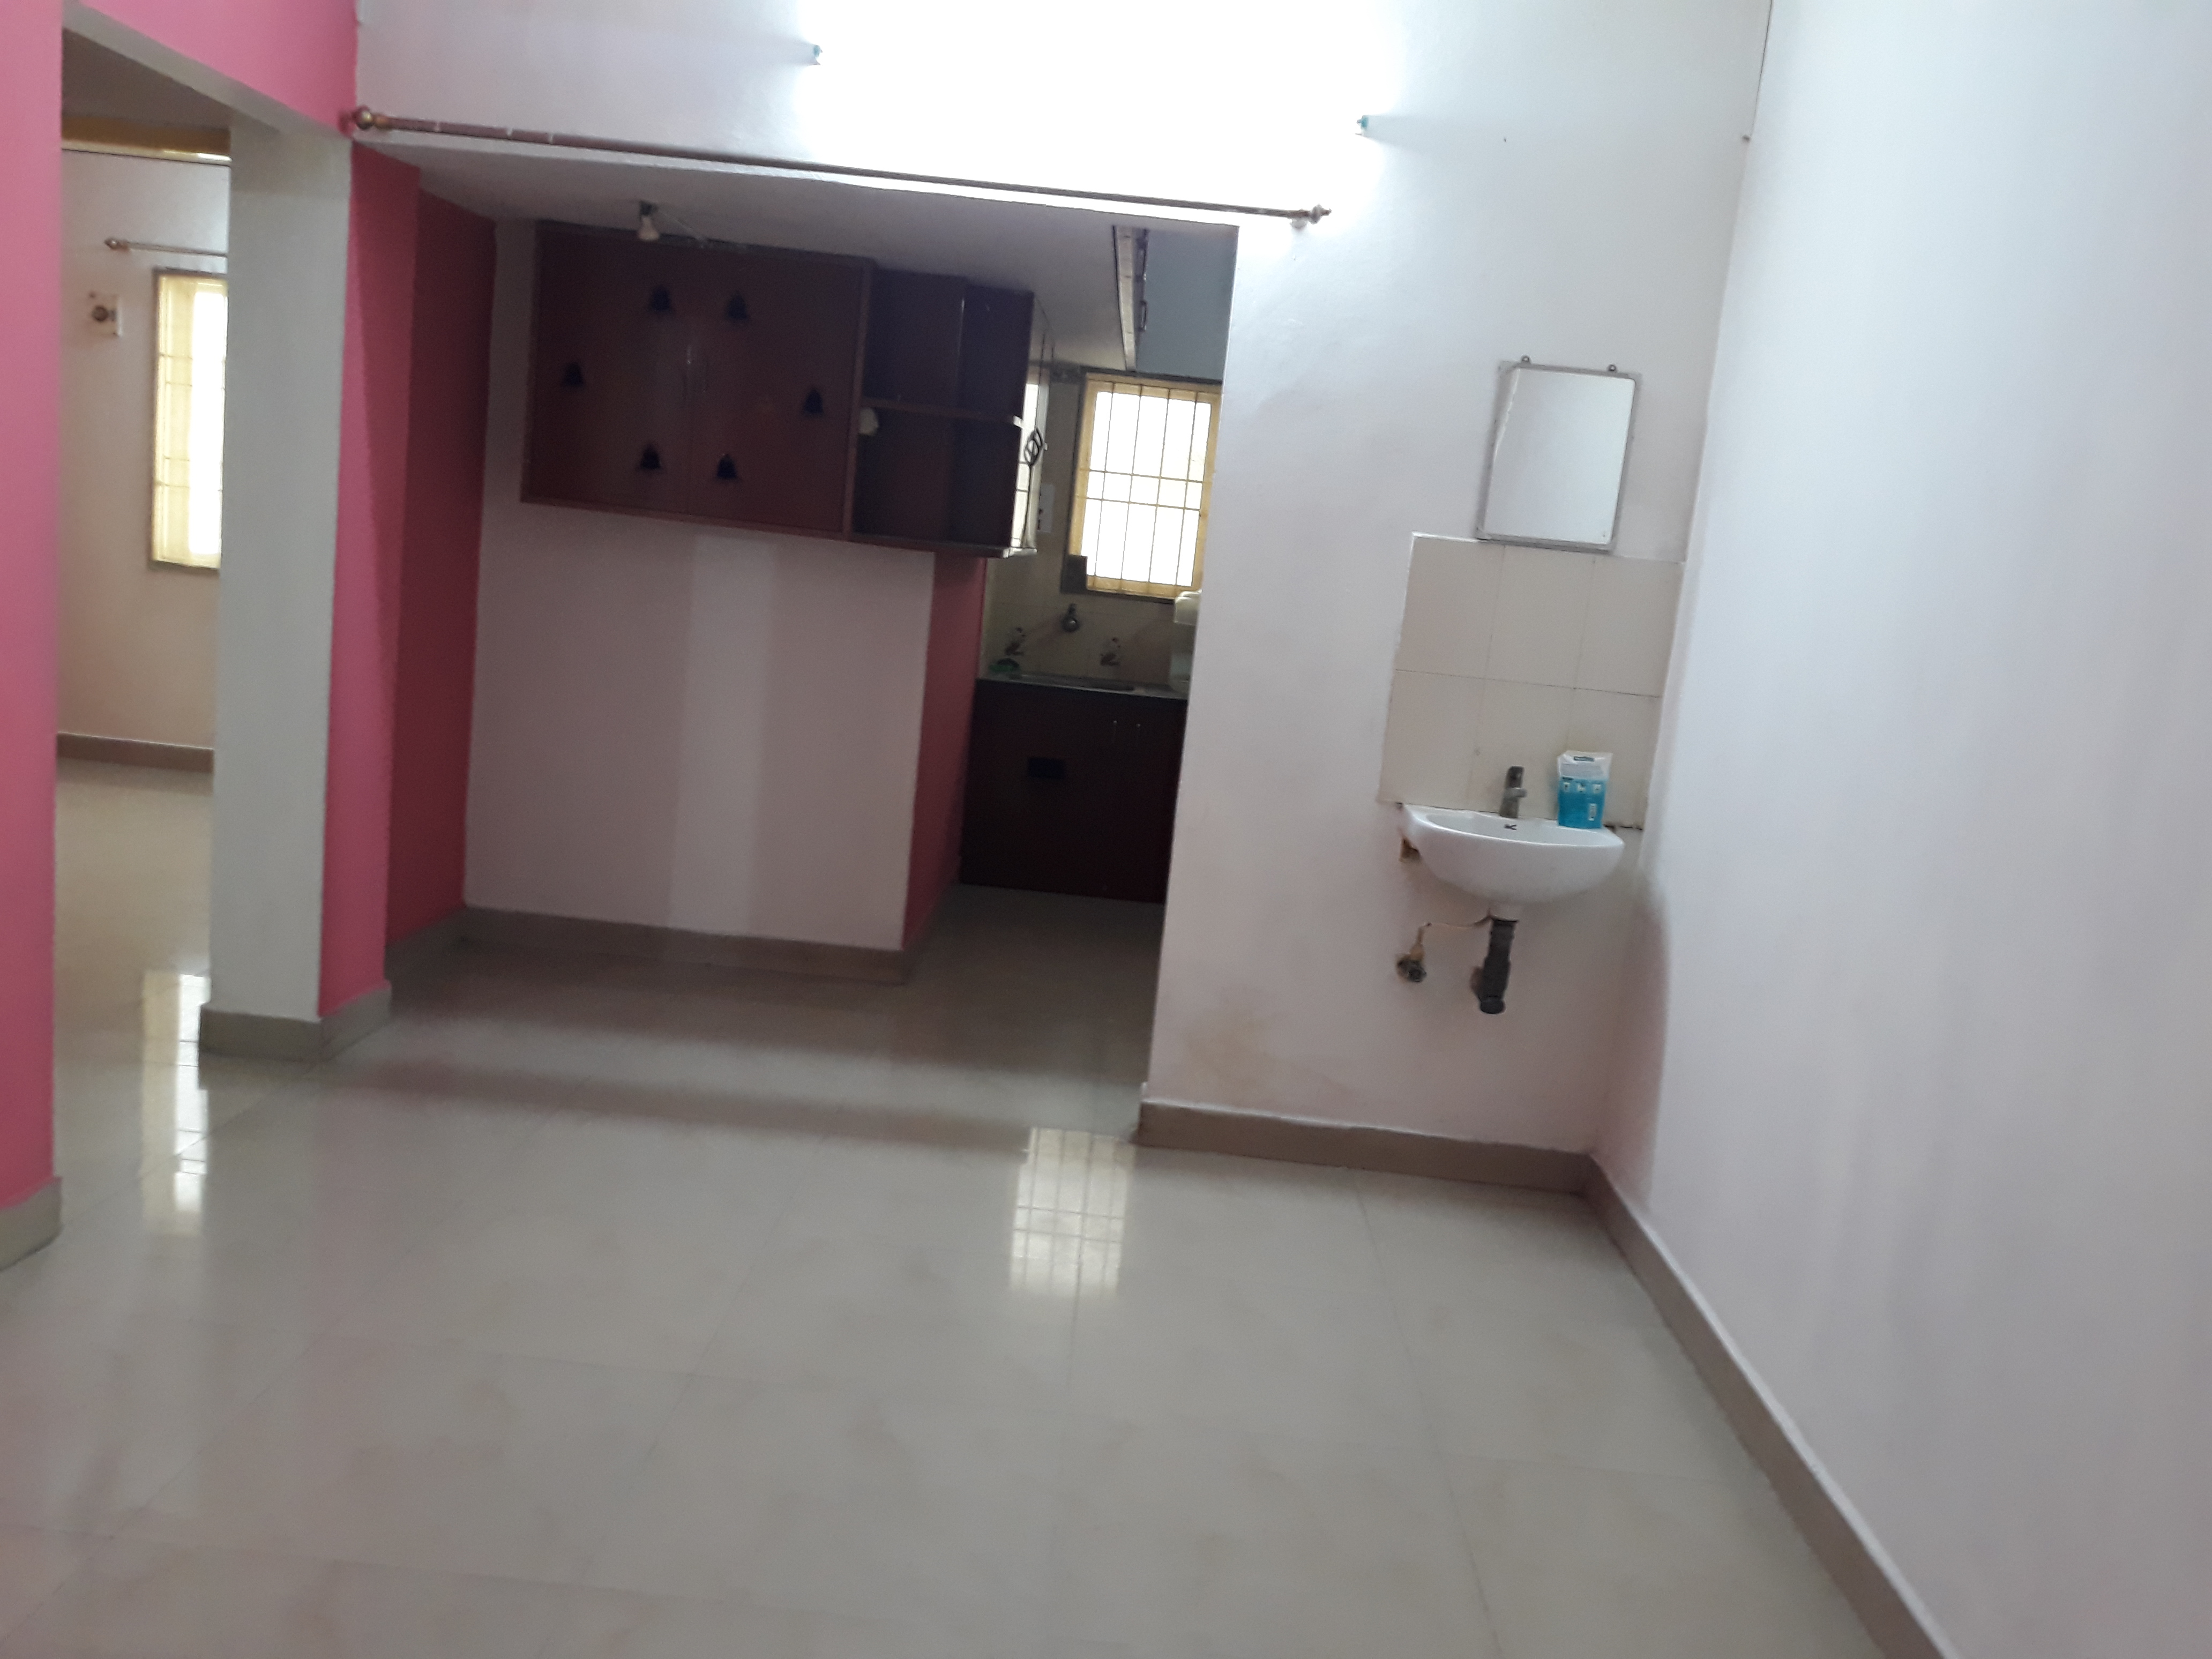 Flats For Resale In Adambakkam Chennai Apartments For